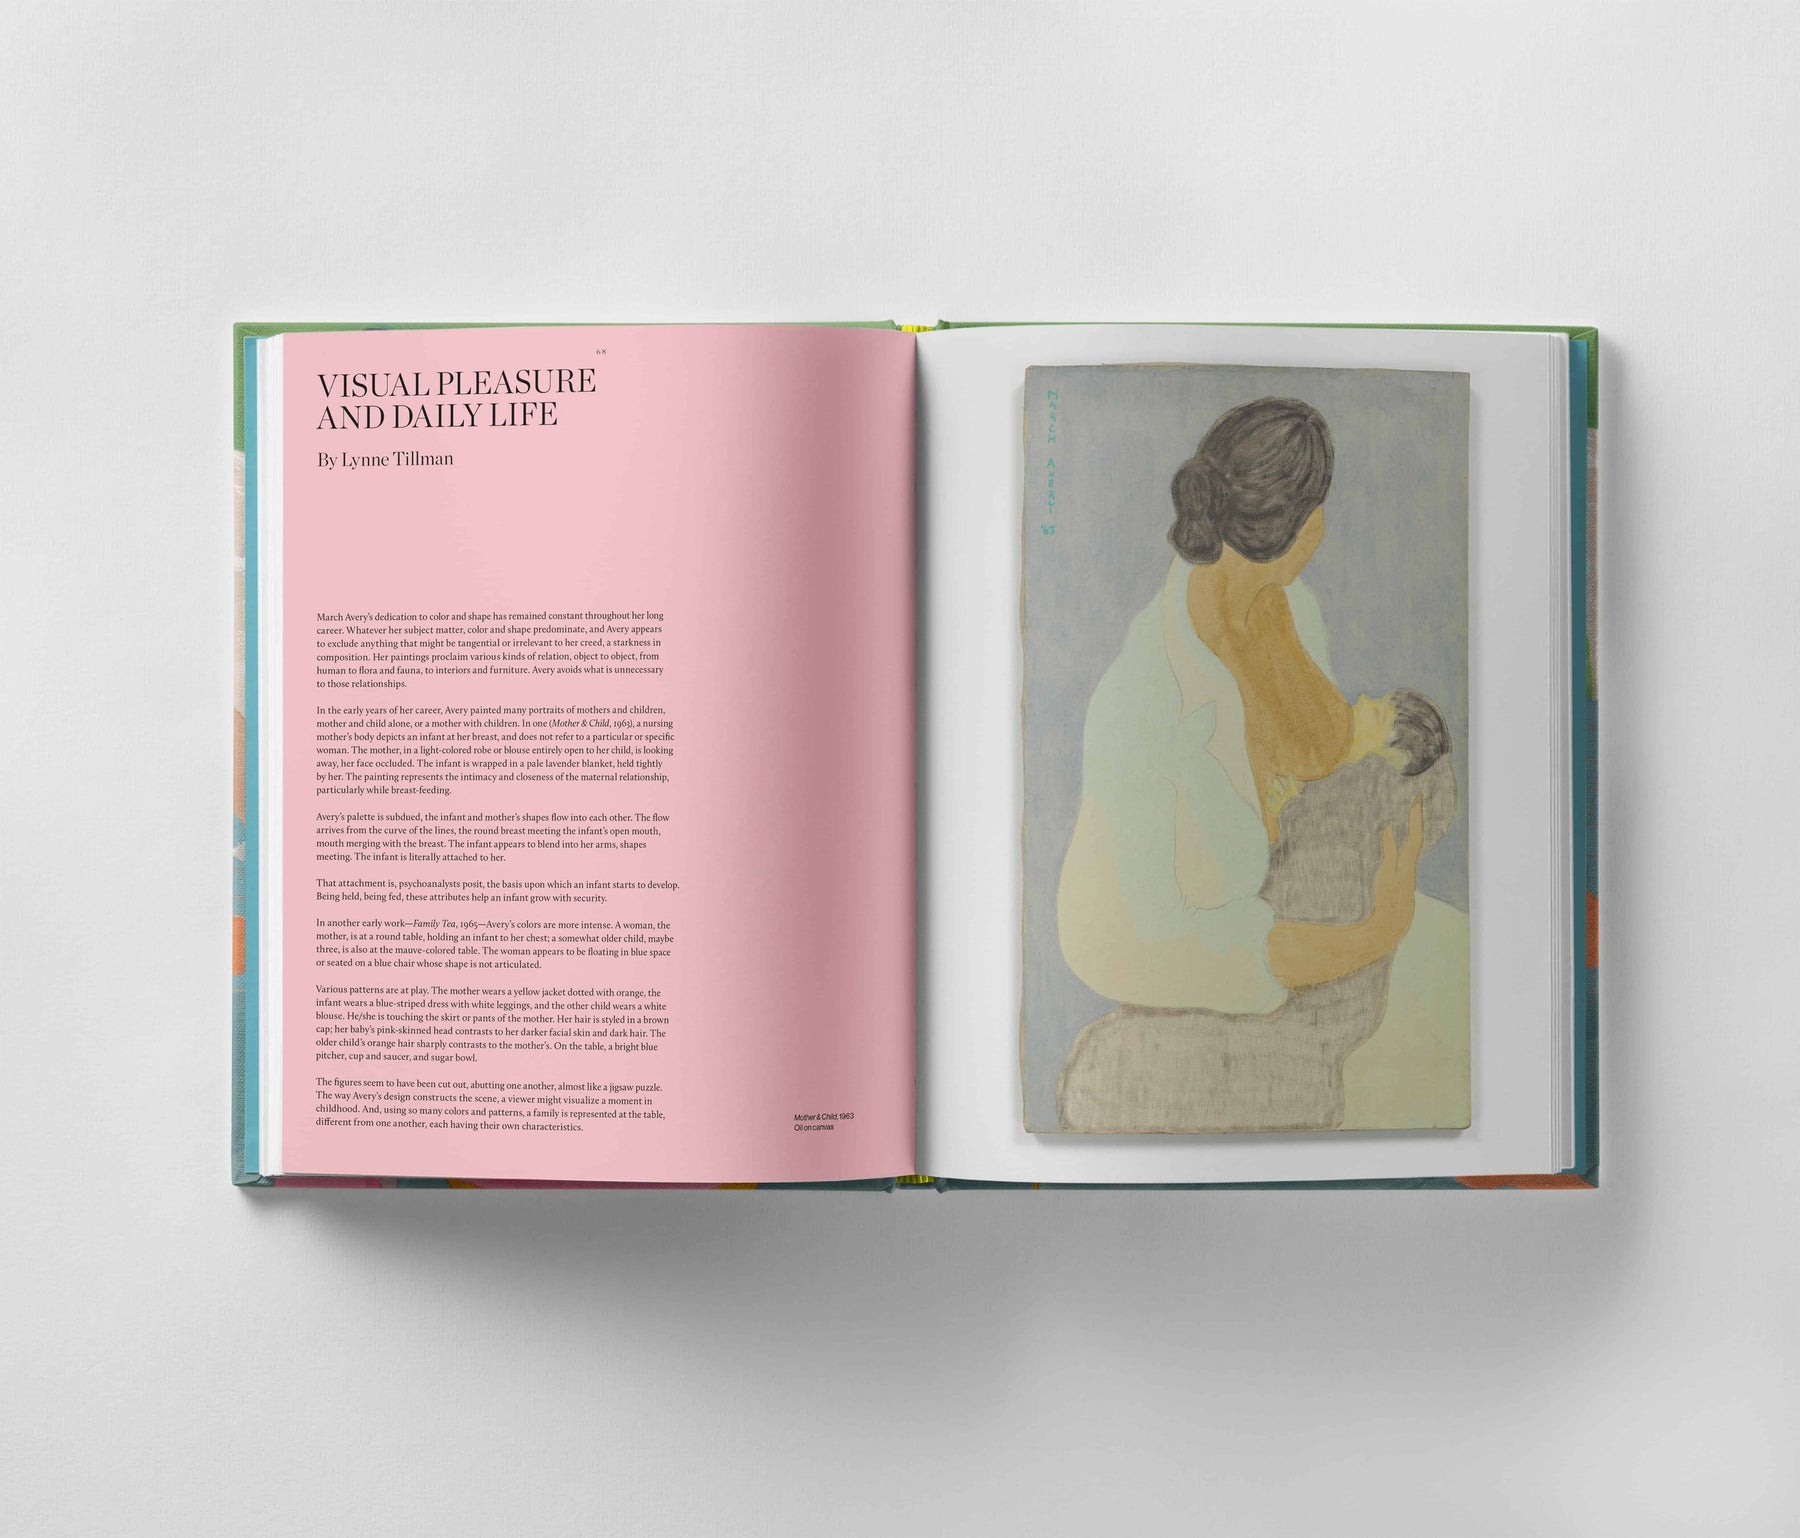 Open book showing a text page titled "Visual Pleasure and Daily Life" on the left and an illustration of a woman cradling a child on the right, reminiscent of the emotional depth often seen in Black Dog Online's **March Avery: A Life in Color**.